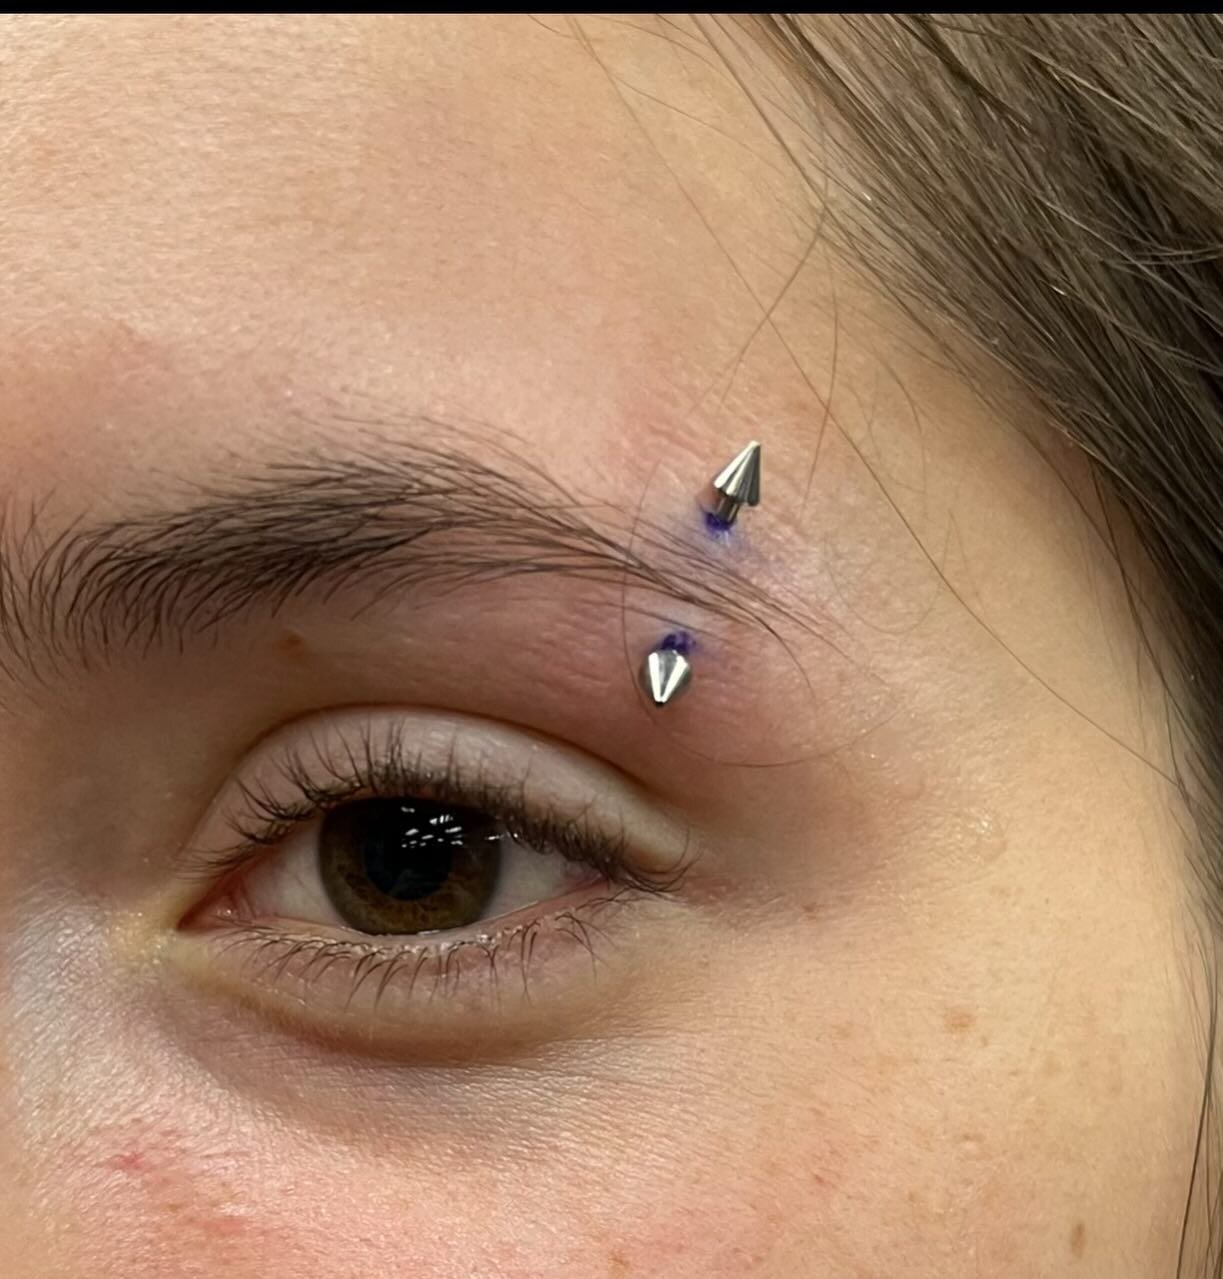 Eyebrow Piercing done with a Titanium curved barbell + Spiked ends 
 ✨ @pokes_by_ray ✨
.
.
.
#pierced #eyebrowpiercing #gtapiercings #brampton #bodymods #piercings